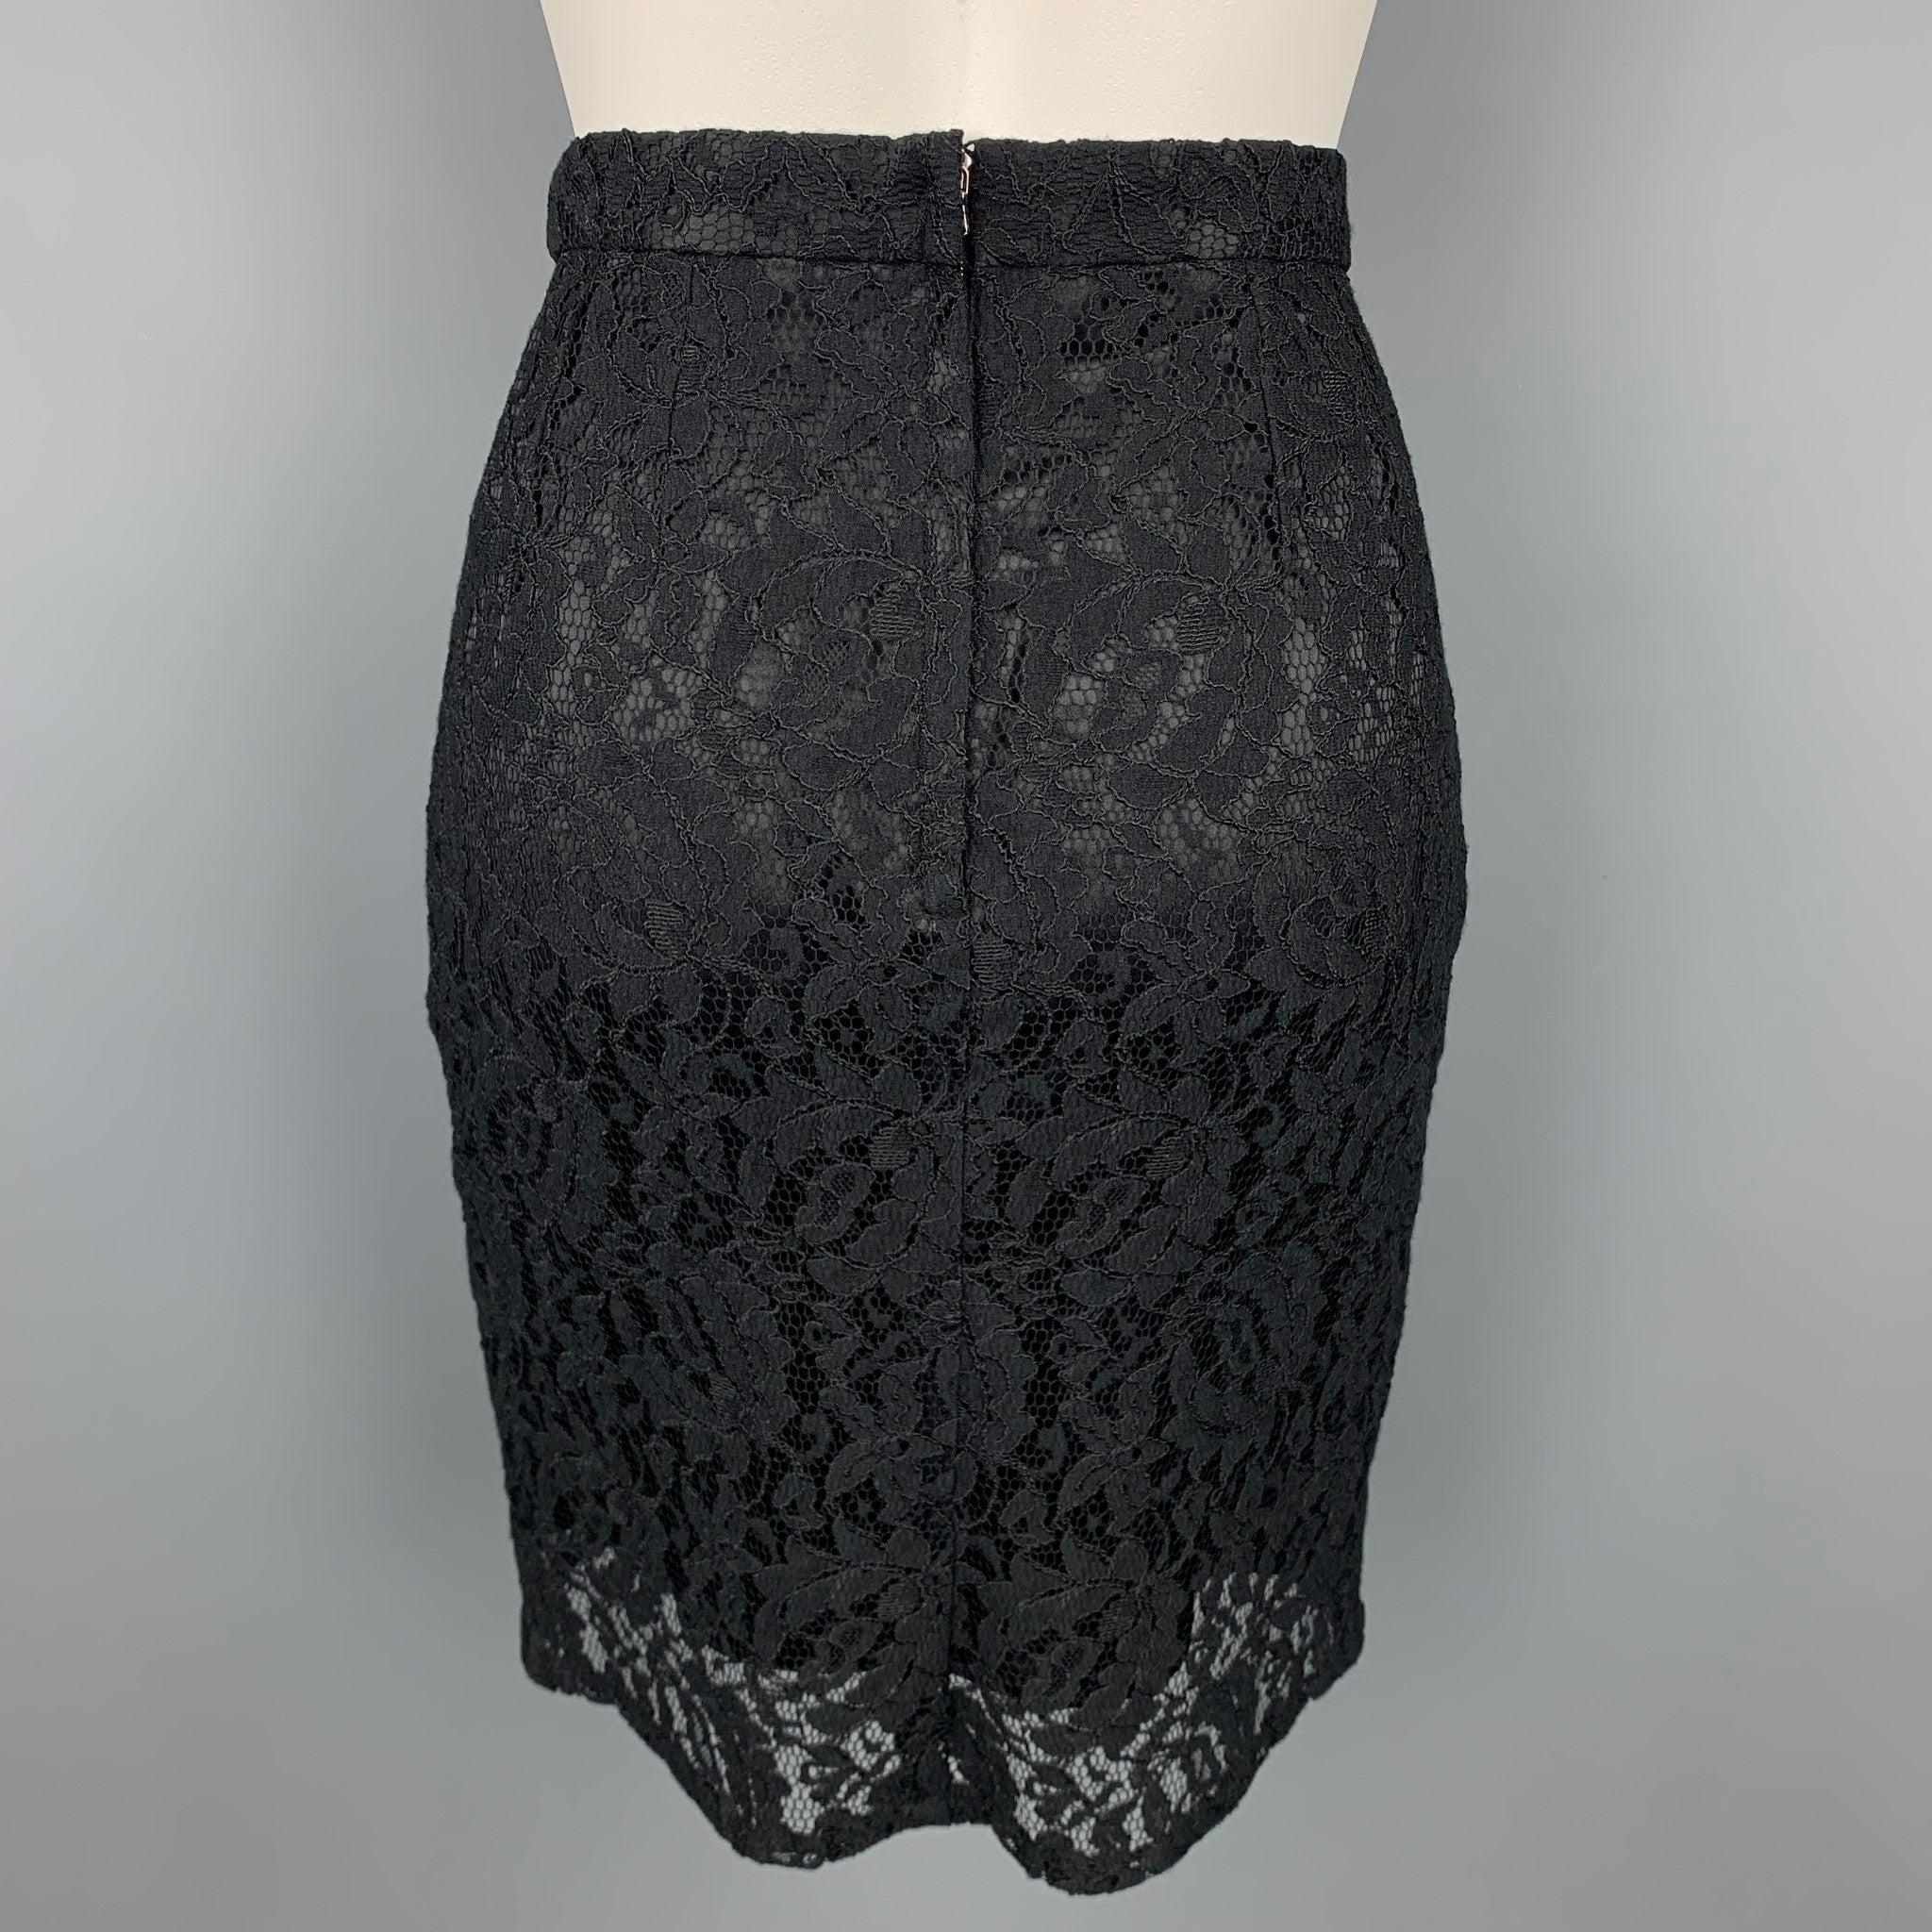 DOLCE & GABBANA Size 4 Black Lace Pencil Skirt In Good Condition For Sale In San Francisco, CA